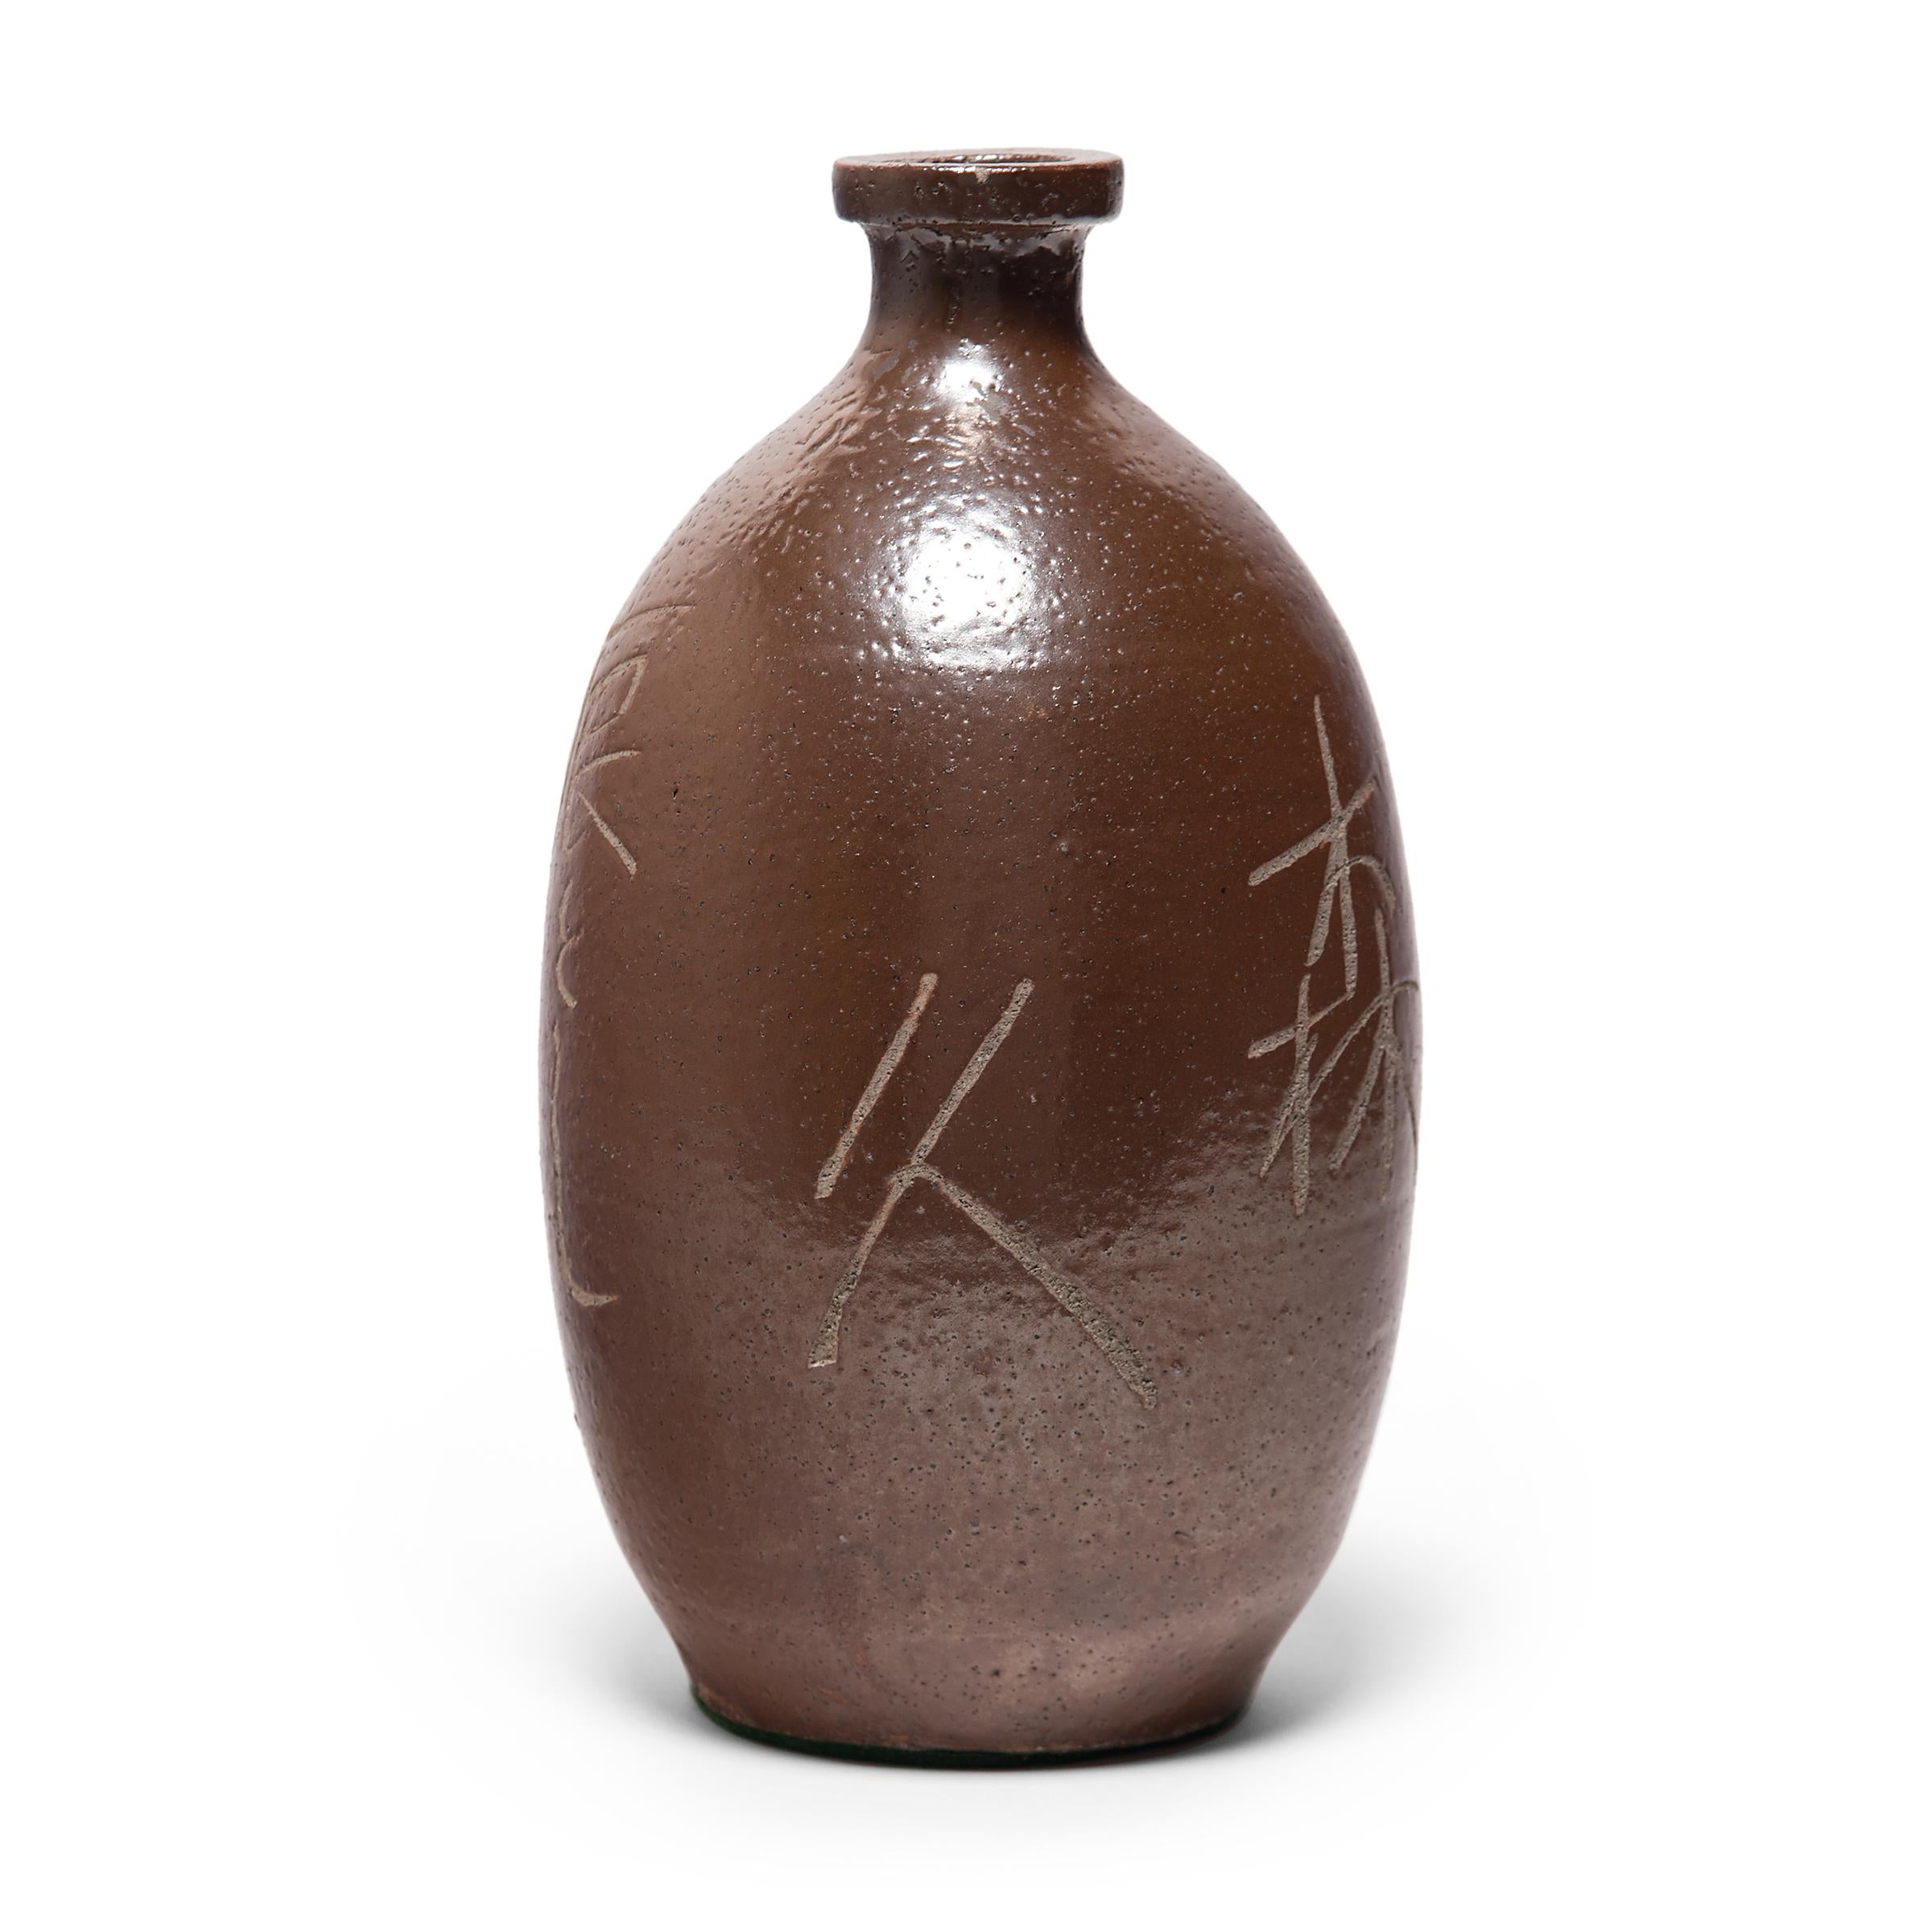 This glazed ceramic jar is a Japanese sake bottle from the late-Meiji era. The jar has a rounded bottleneck form and is coated with a warm brown glaze in resemblance to bizen ware pottery. Across the jar's sides, characters denoting details of